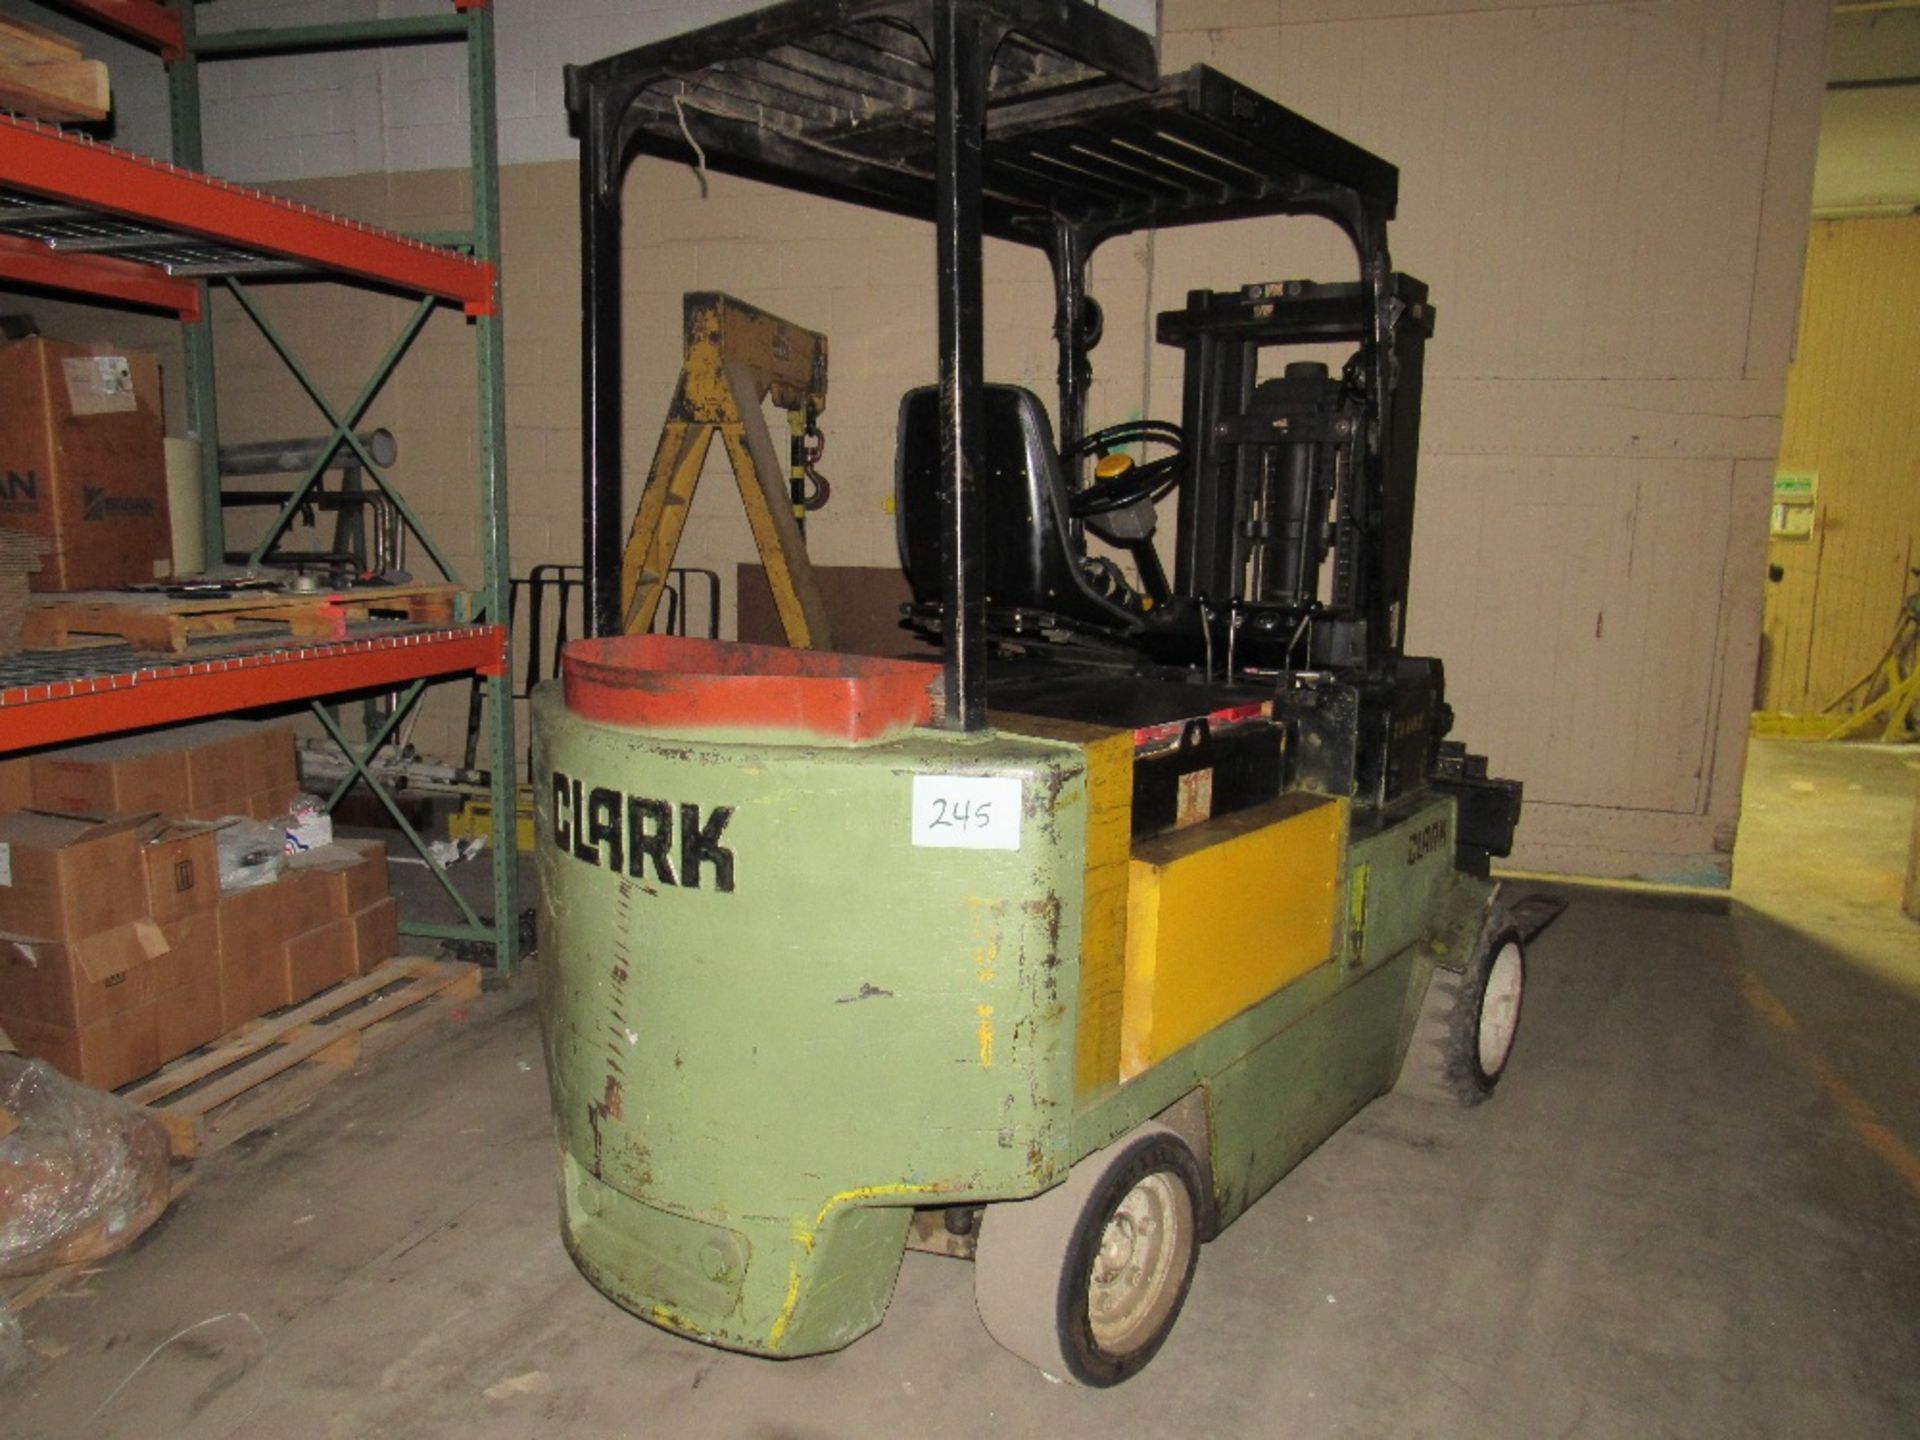 Clark Heavy duty 8000 pound Sit Down Forklift Truck battery operated. Battery weak (Rigging and